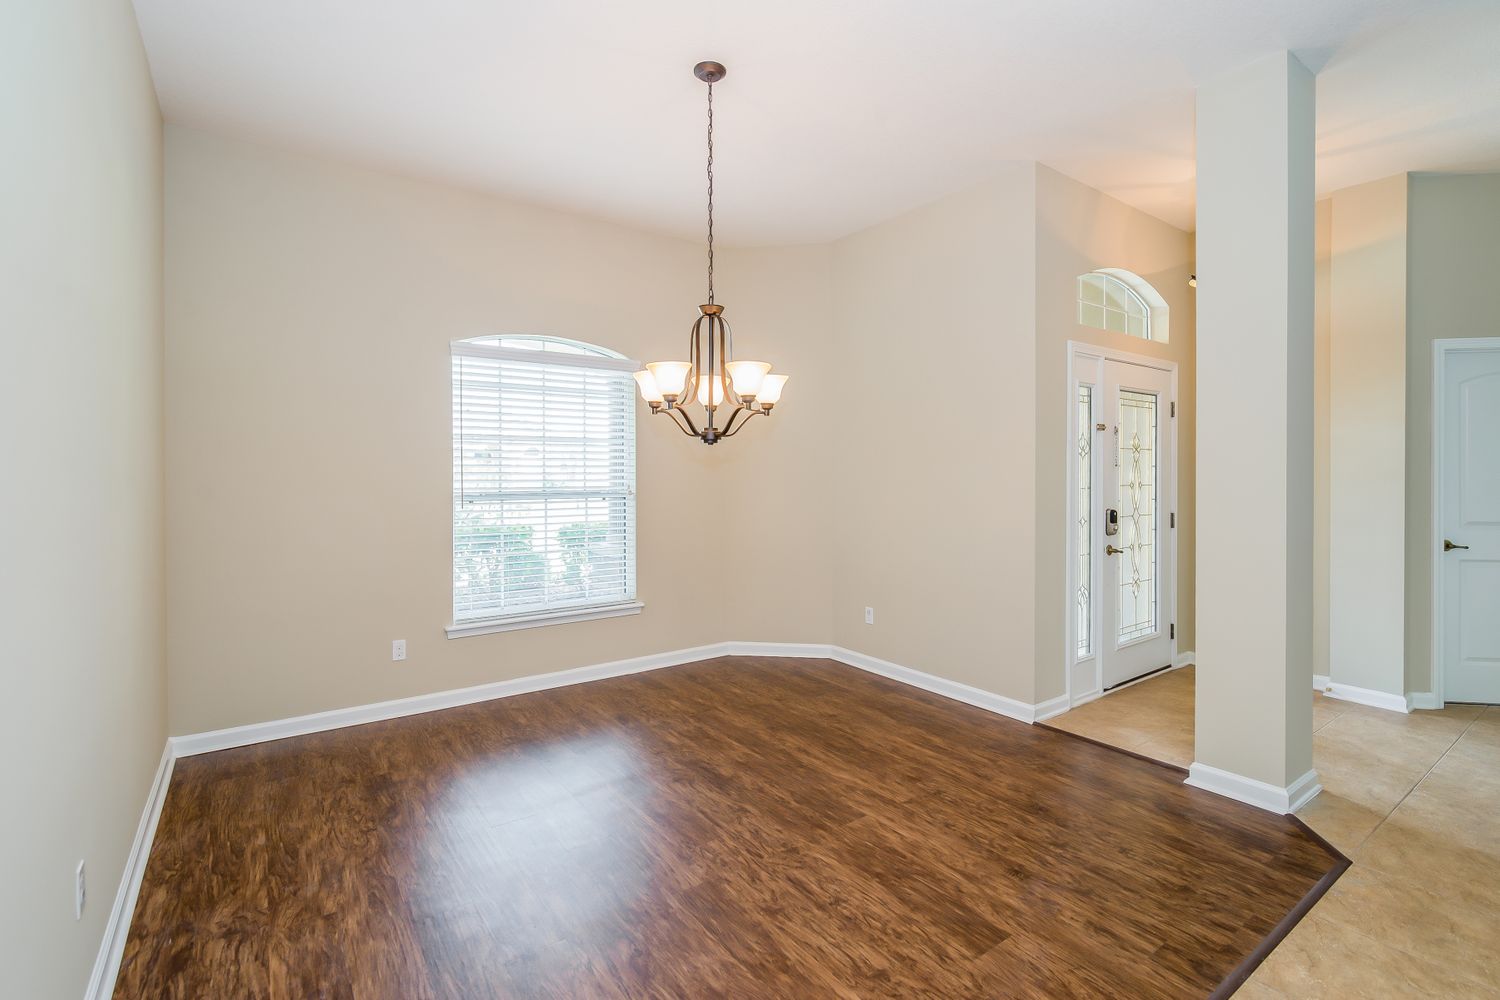 Charming dining area with wood flooring at Invitation Homes Jacksonville.